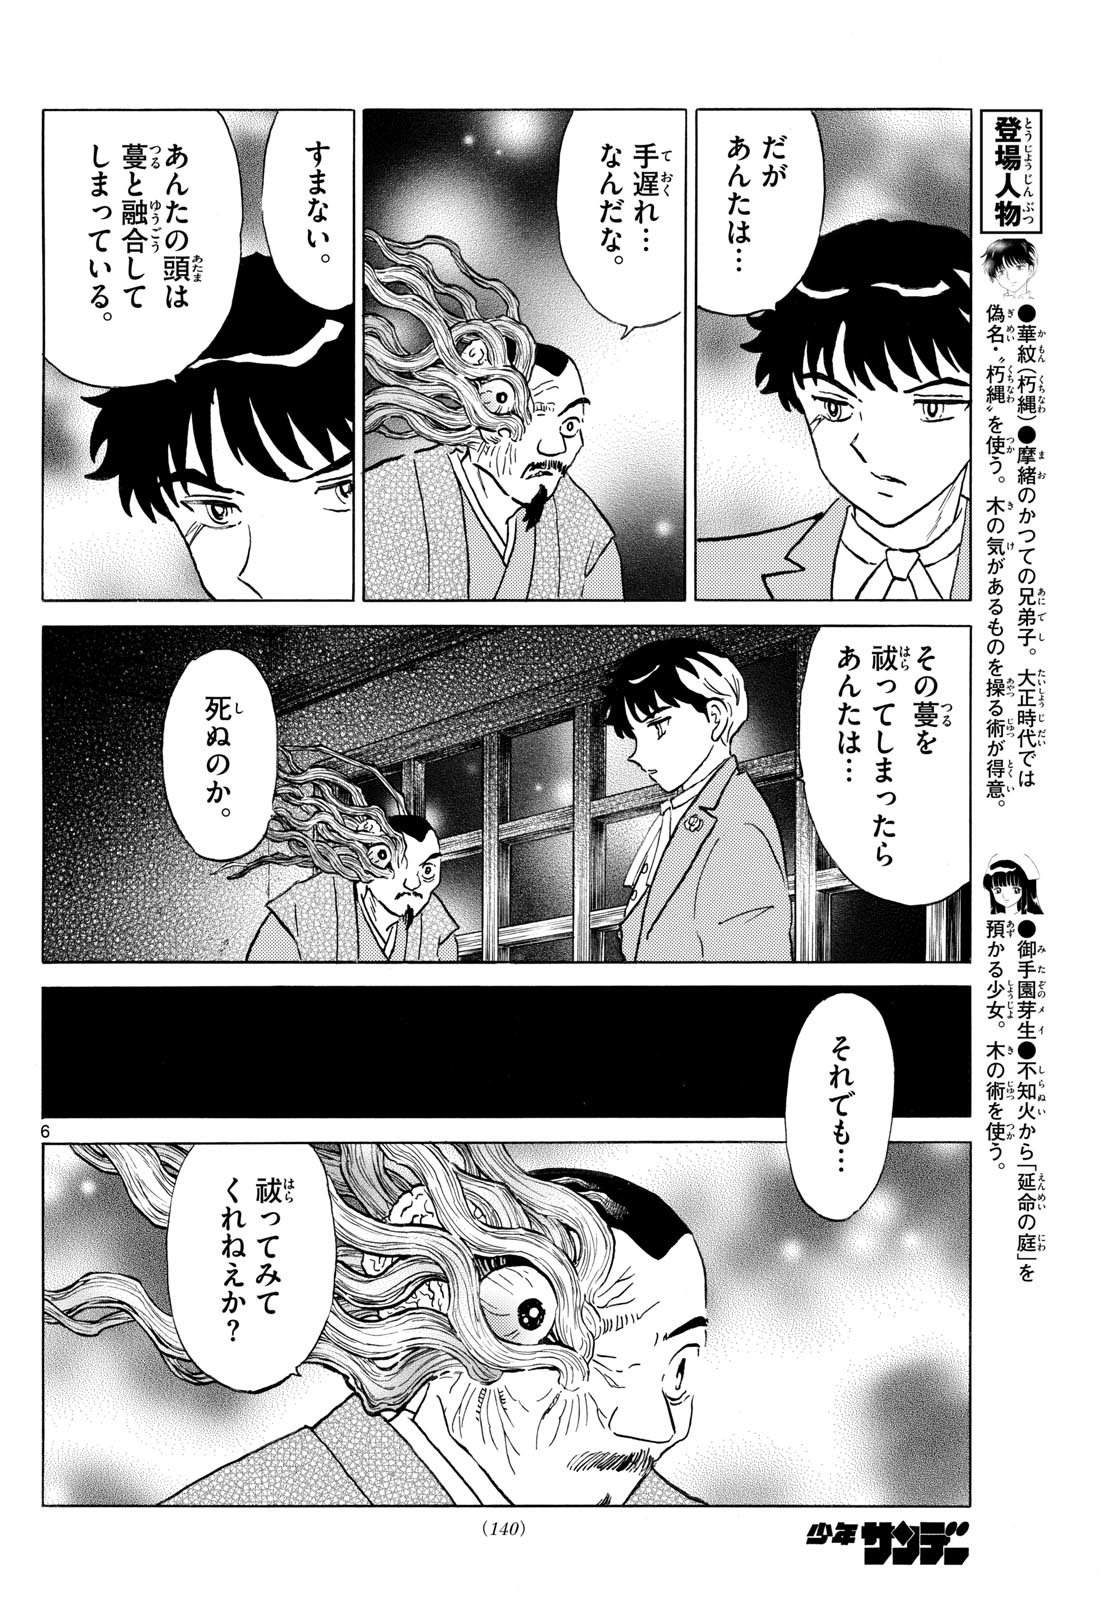 MAO - Chapter 229 - Page 6